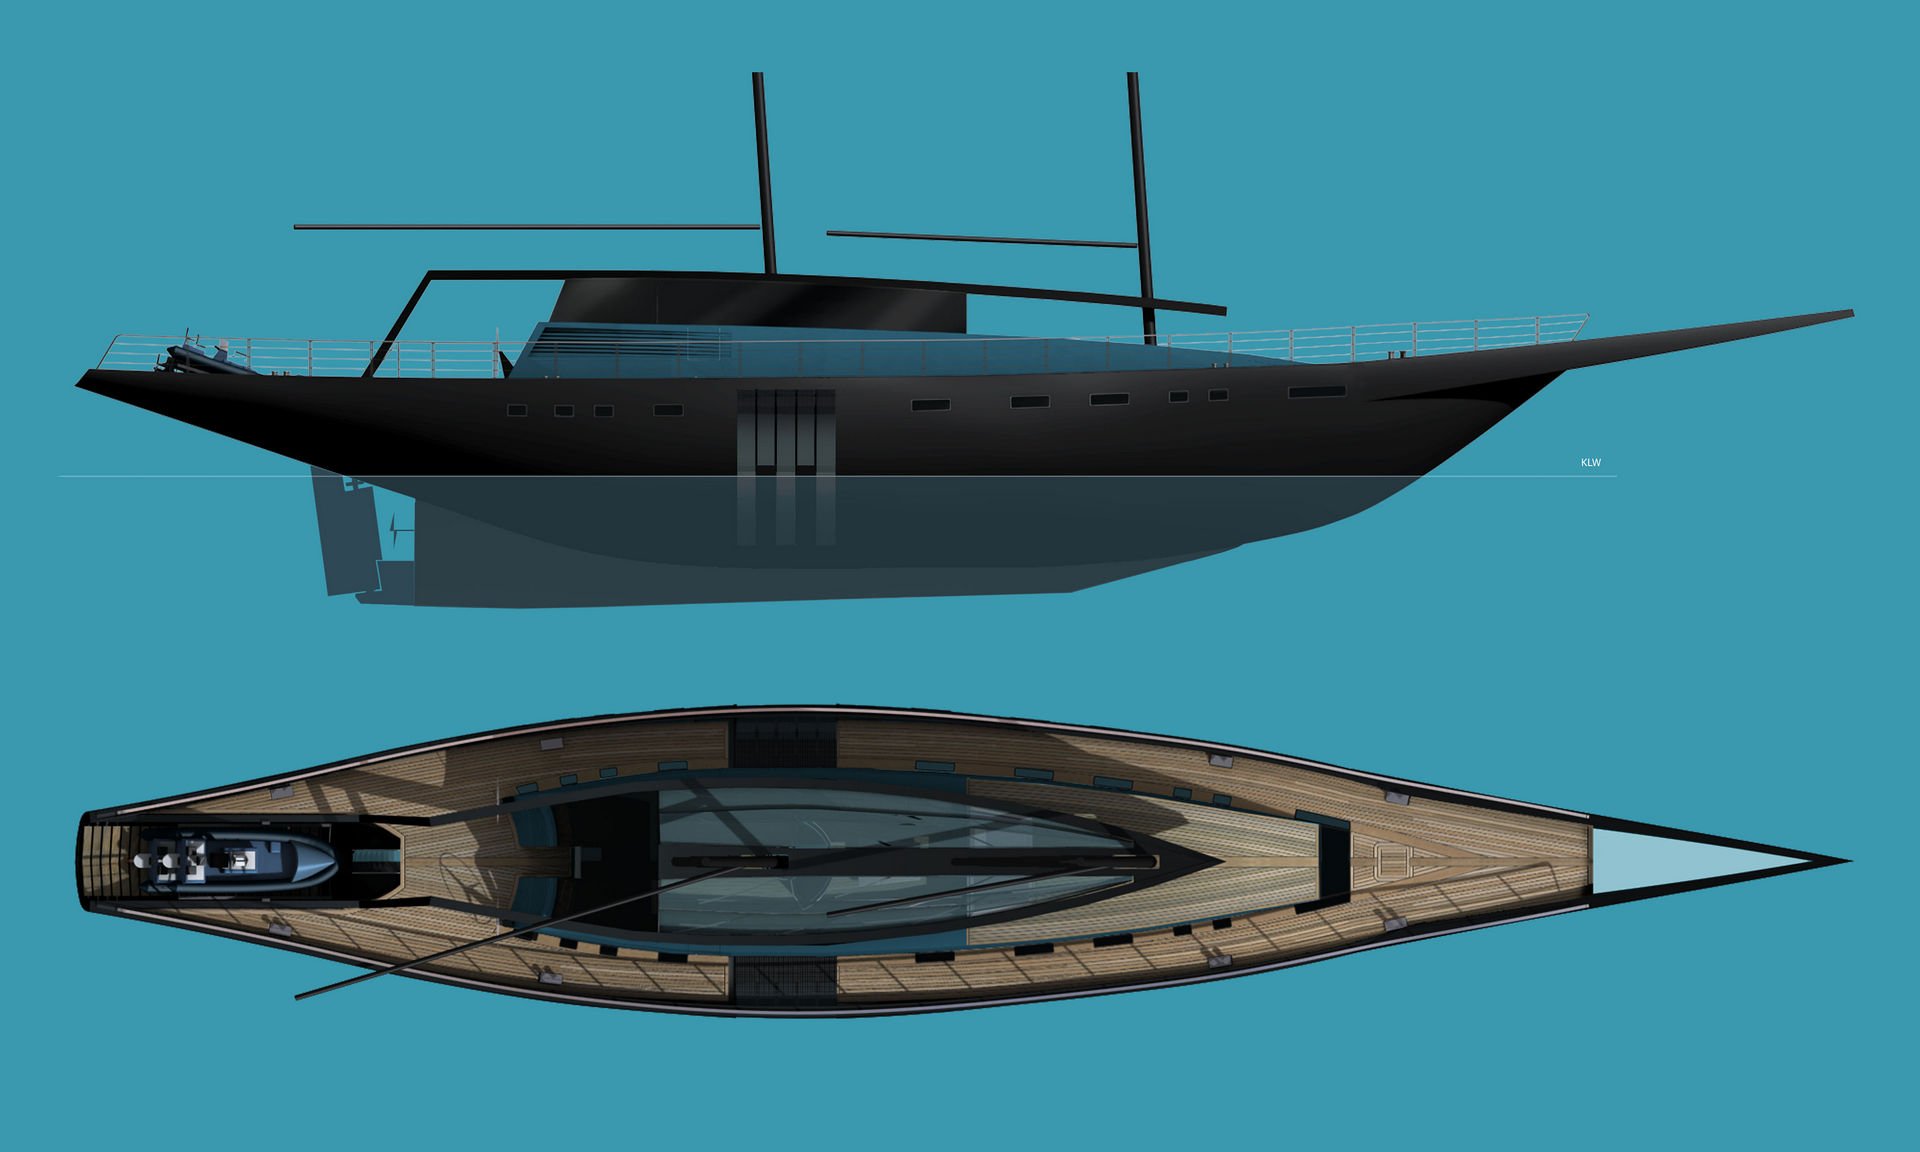 Tropical Sailing Yacht for Diving exterior design side and top views